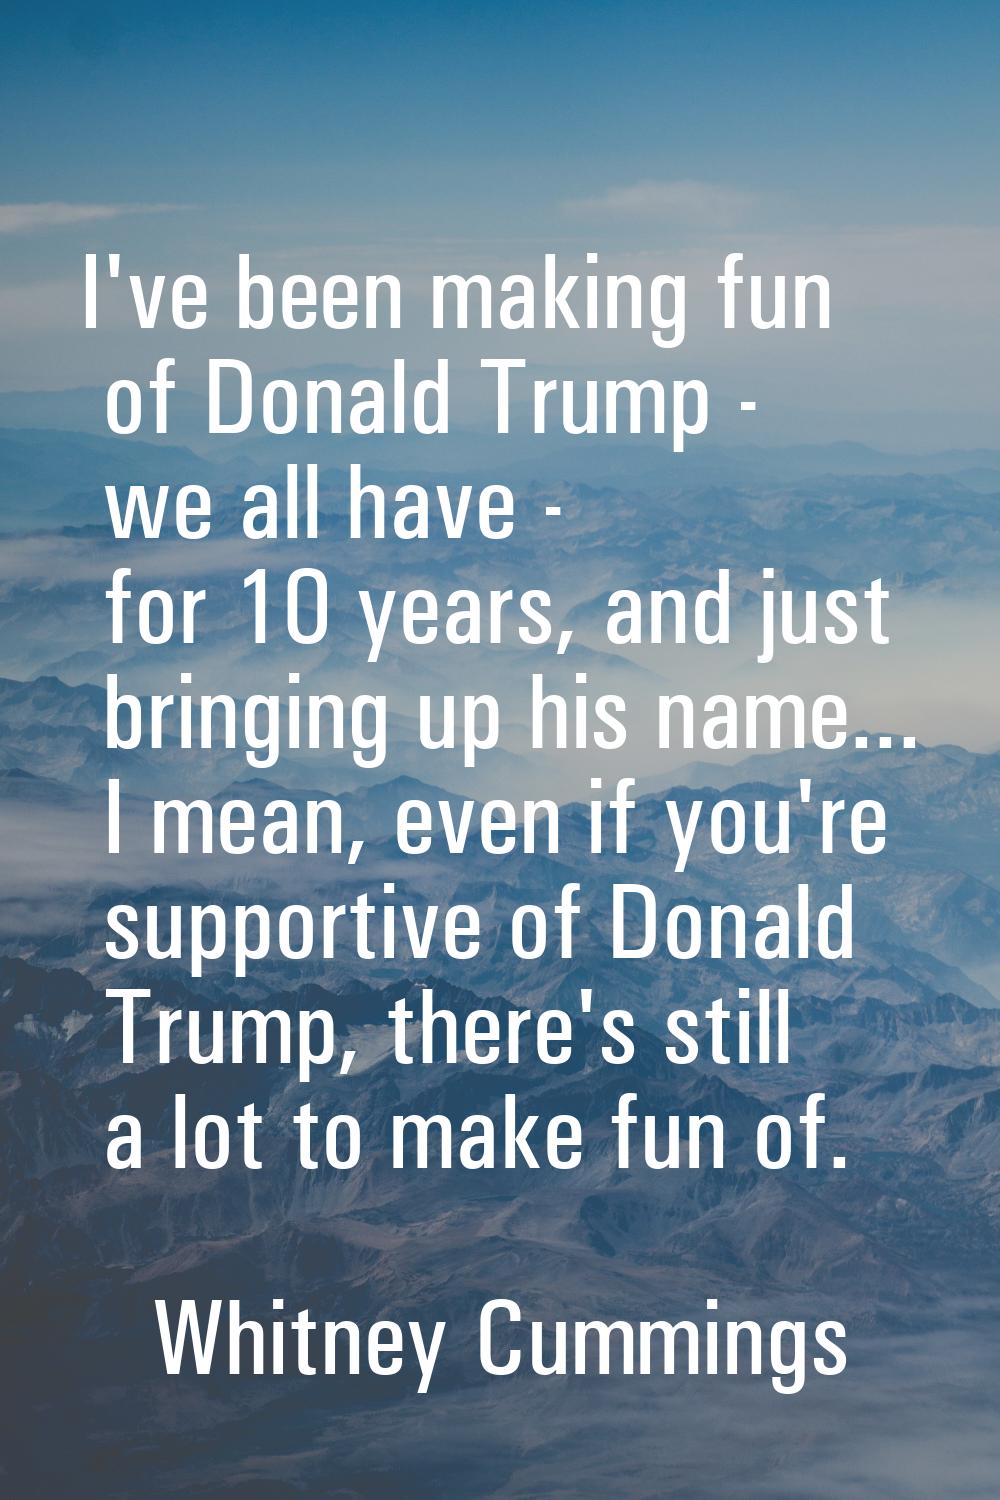 I've been making fun of Donald Trump - we all have - for 10 years, and just bringing up his name...